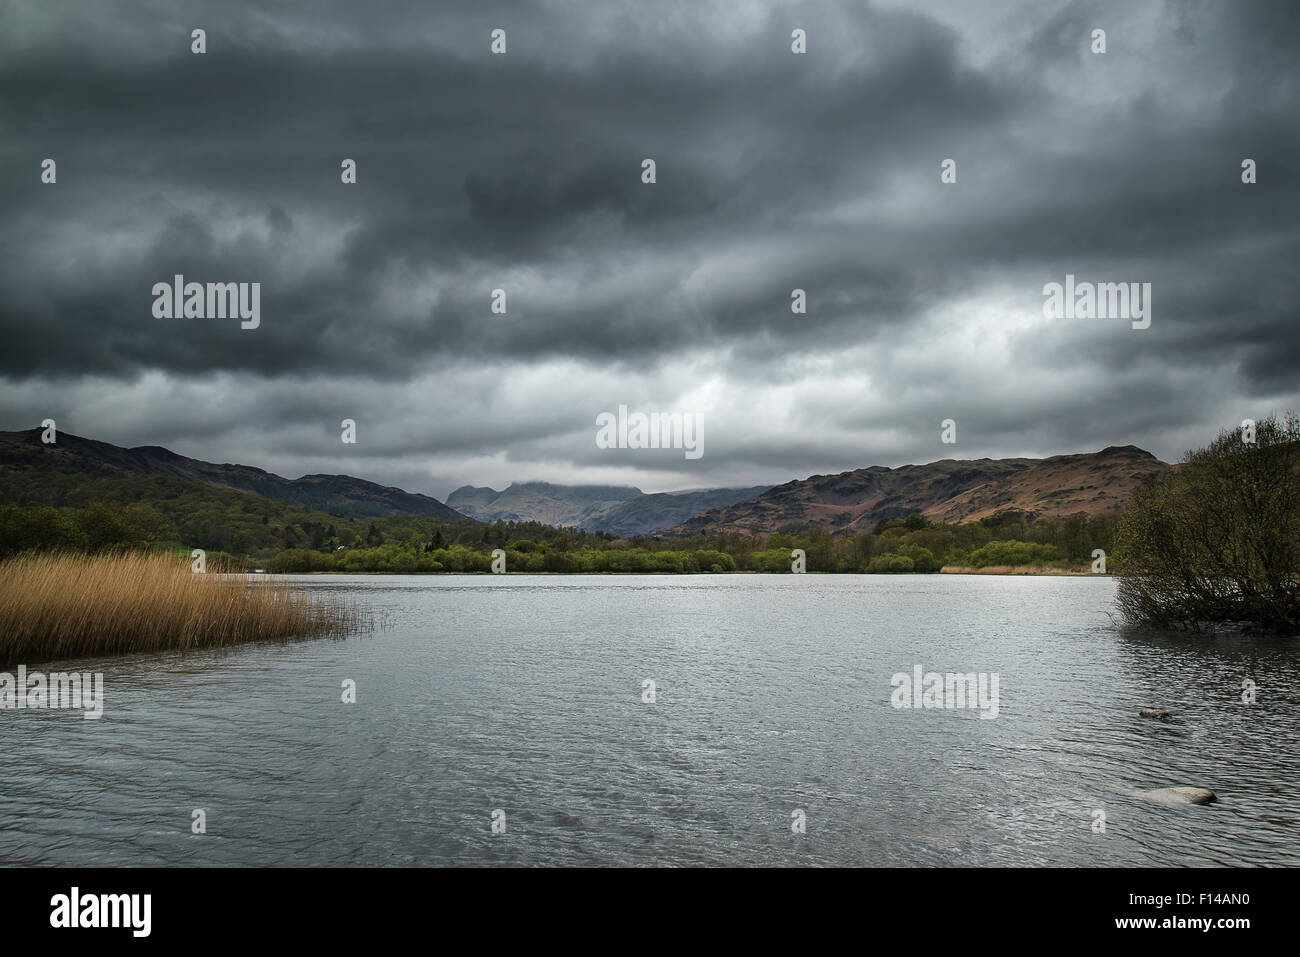 Stormy dramatic sky over Lake District landscape in England Stock Photo